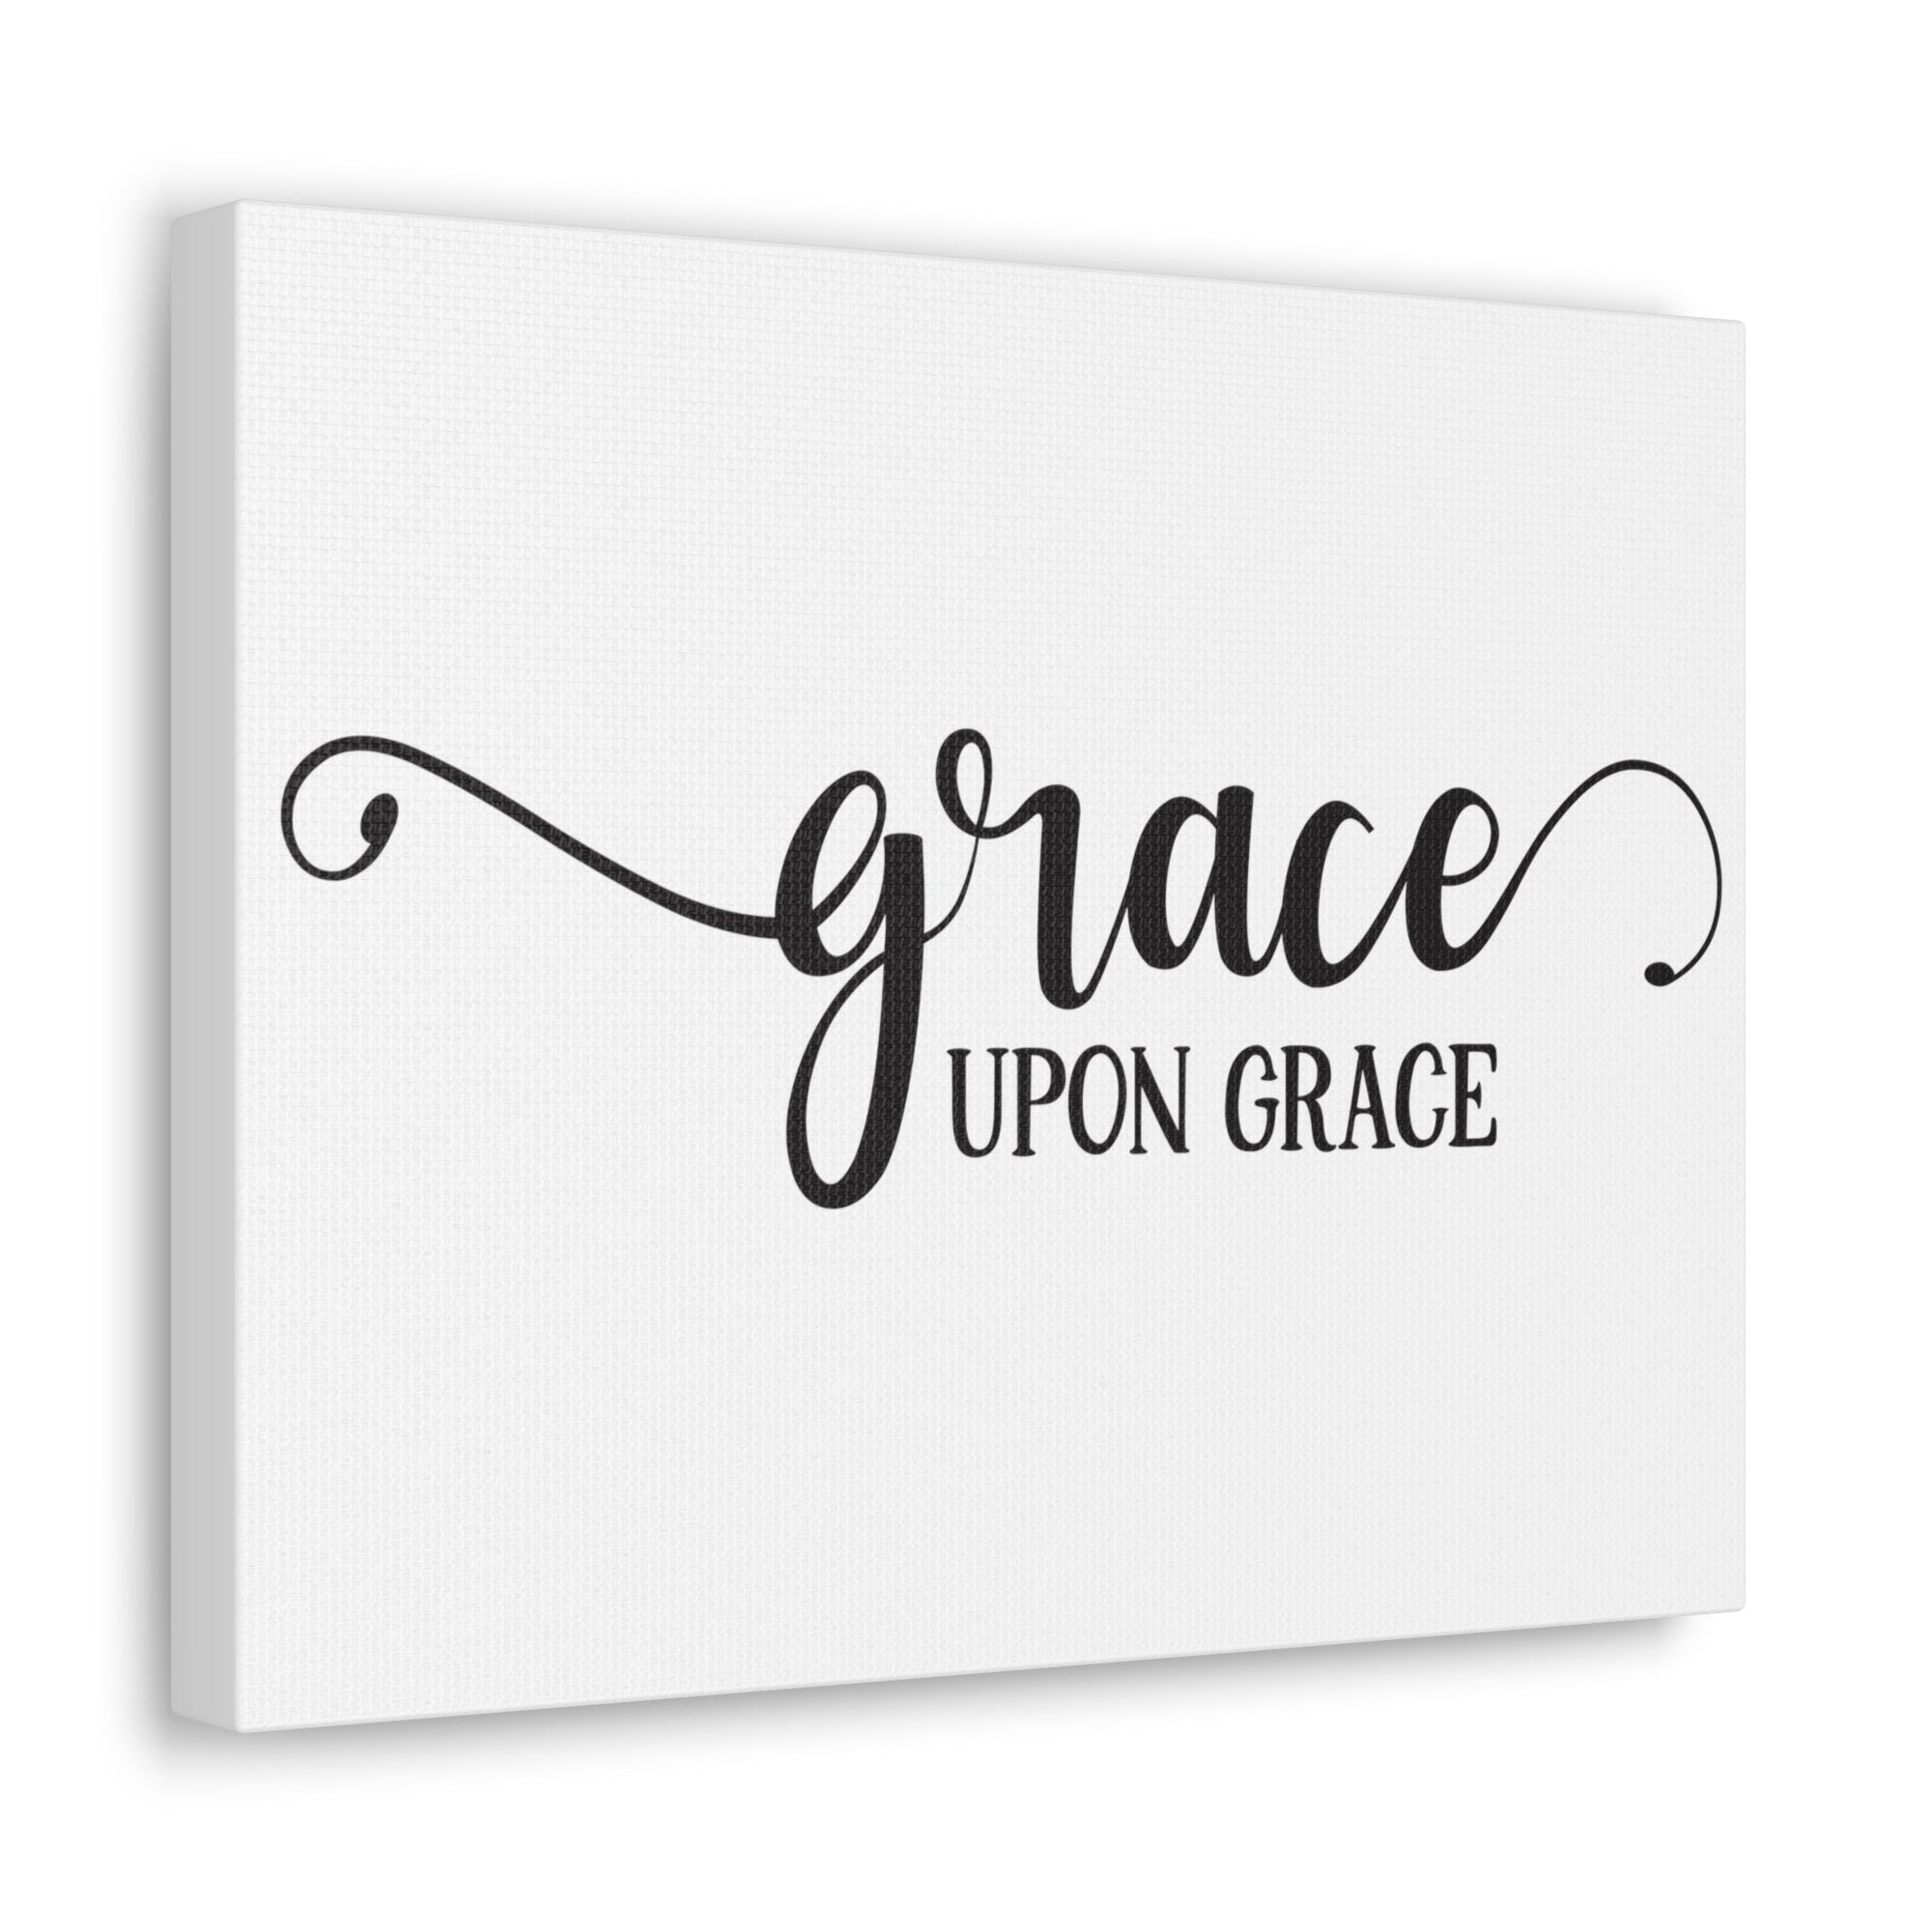 Scripture Walls Grace Upon Grace James 4:6 Christian Wall Art Print Ready to Hang Unframed-Express Your Love Gifts